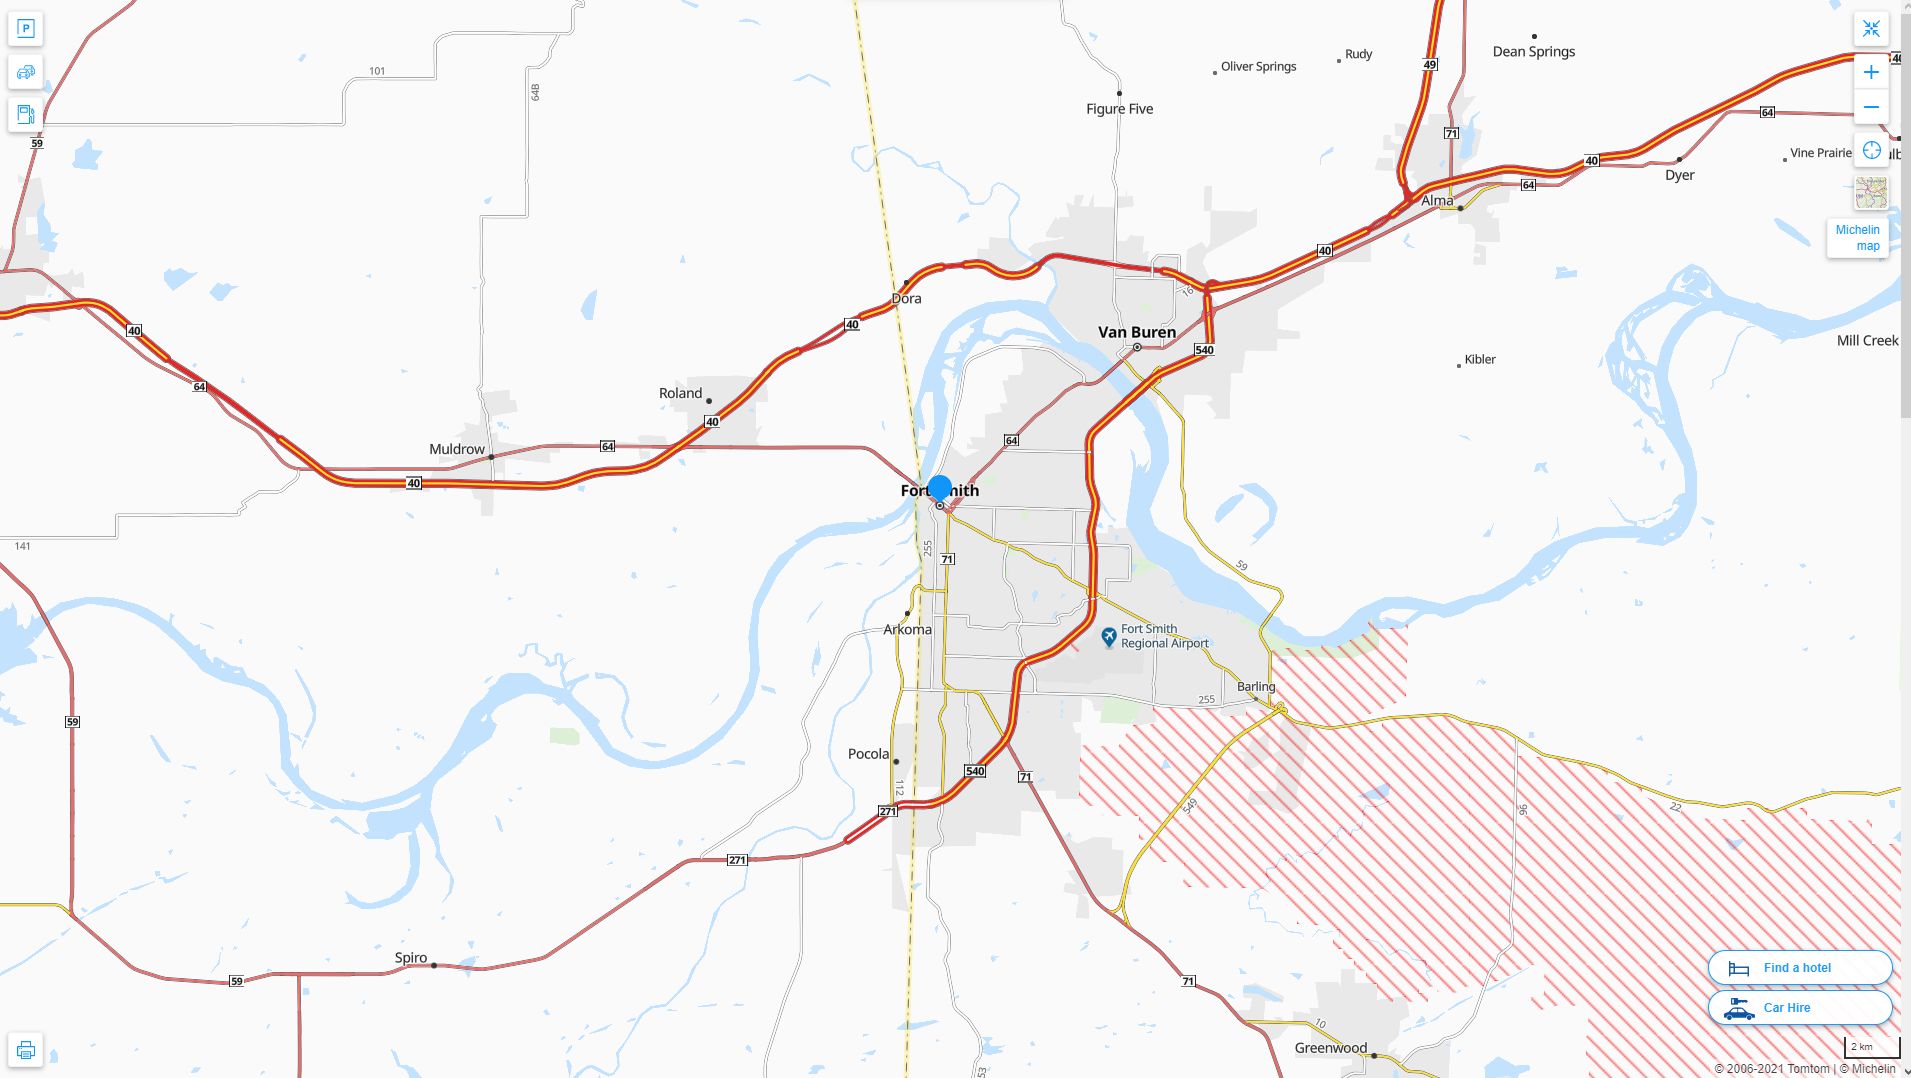 Fort Smith Arkansas Highway and Road Map